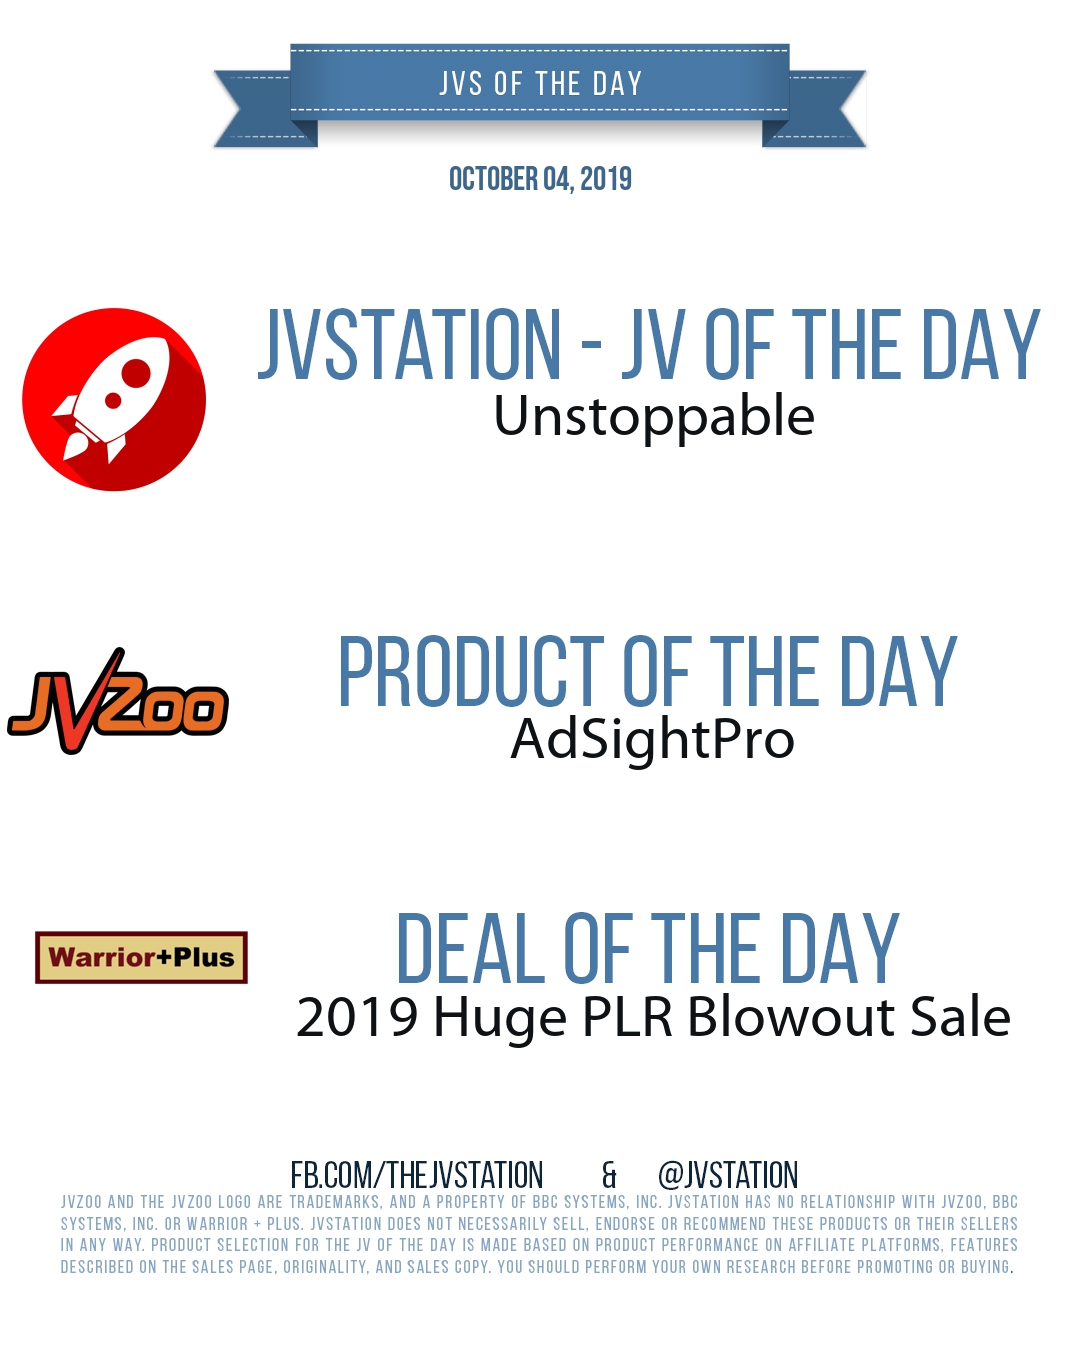 JVs of the day - October 04, 2019